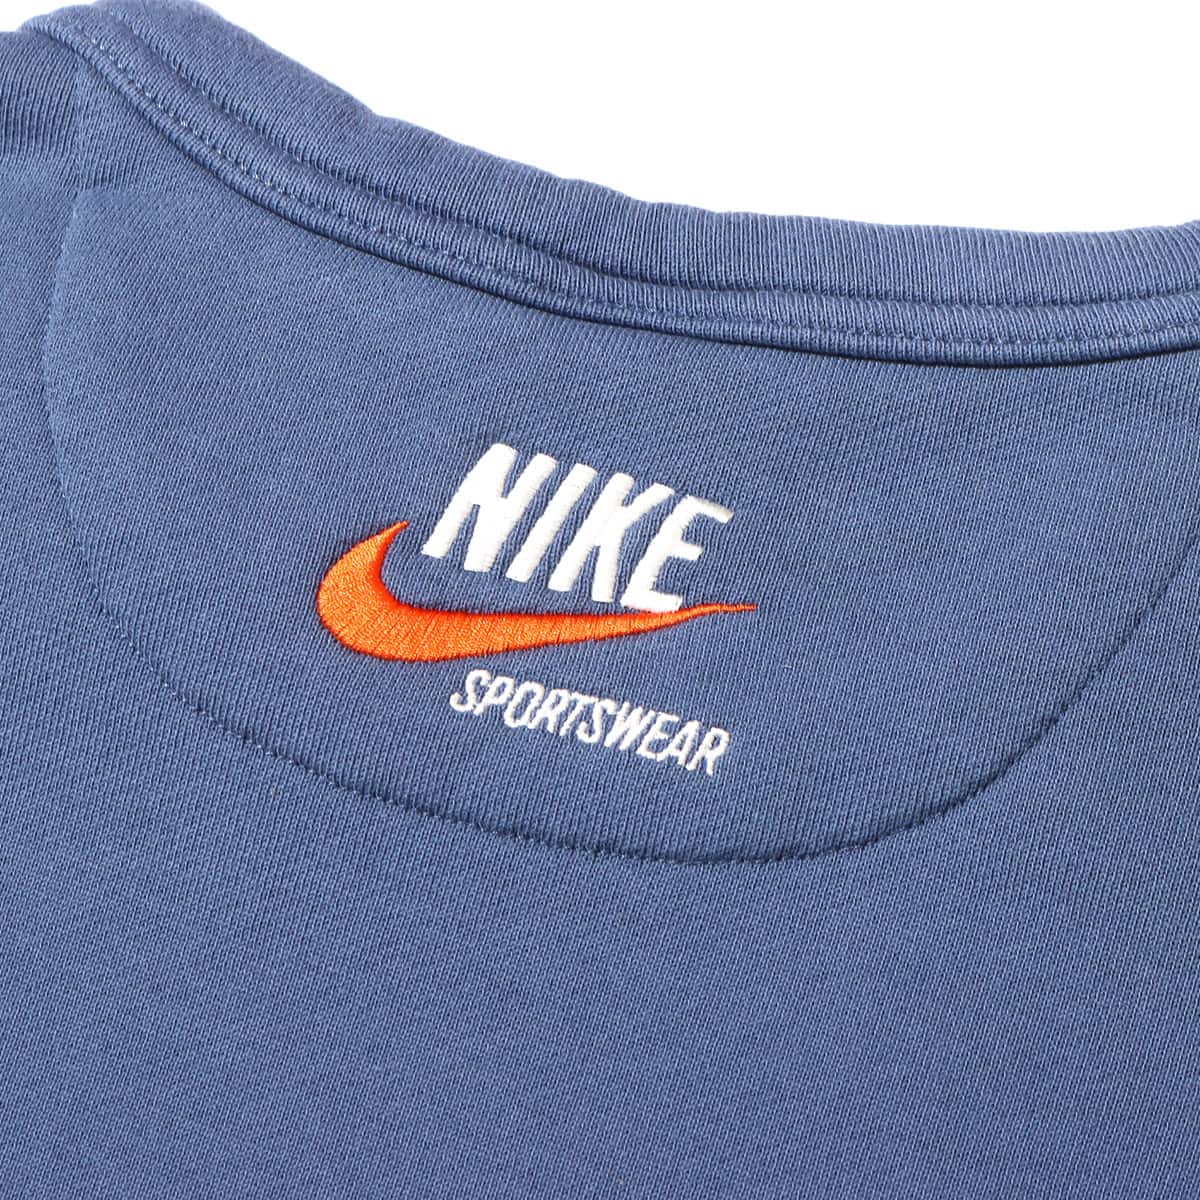 NIKE AS M NSW NIKE TREND FLC CREW DIFFUSED BLUE/SAIL 23SP-I